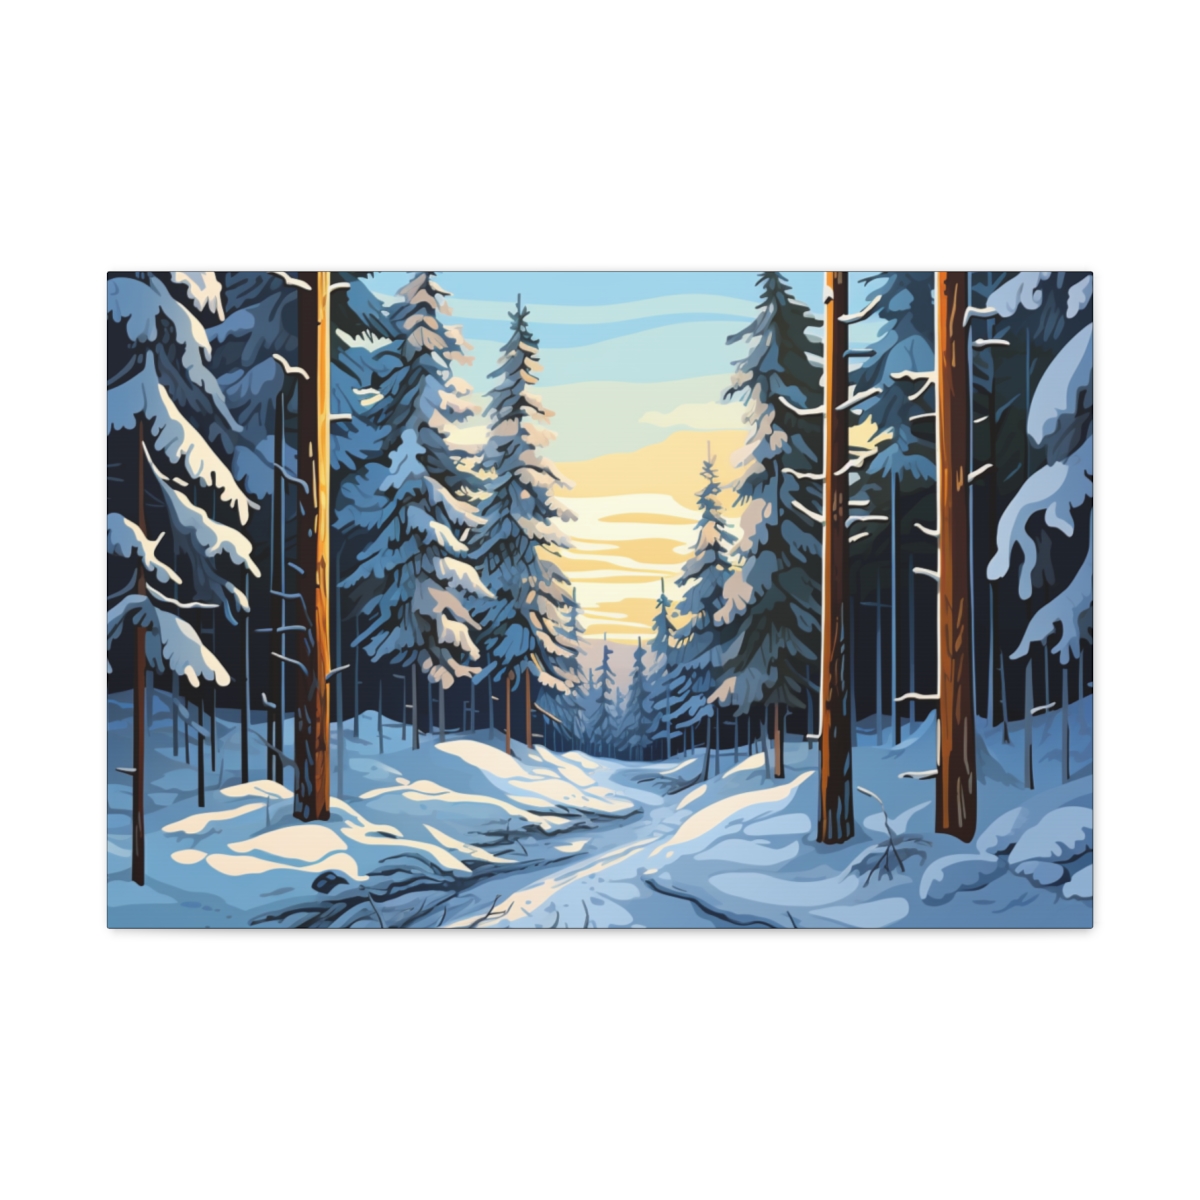 Forest Wall Art Canvas Print: The Way Ahead